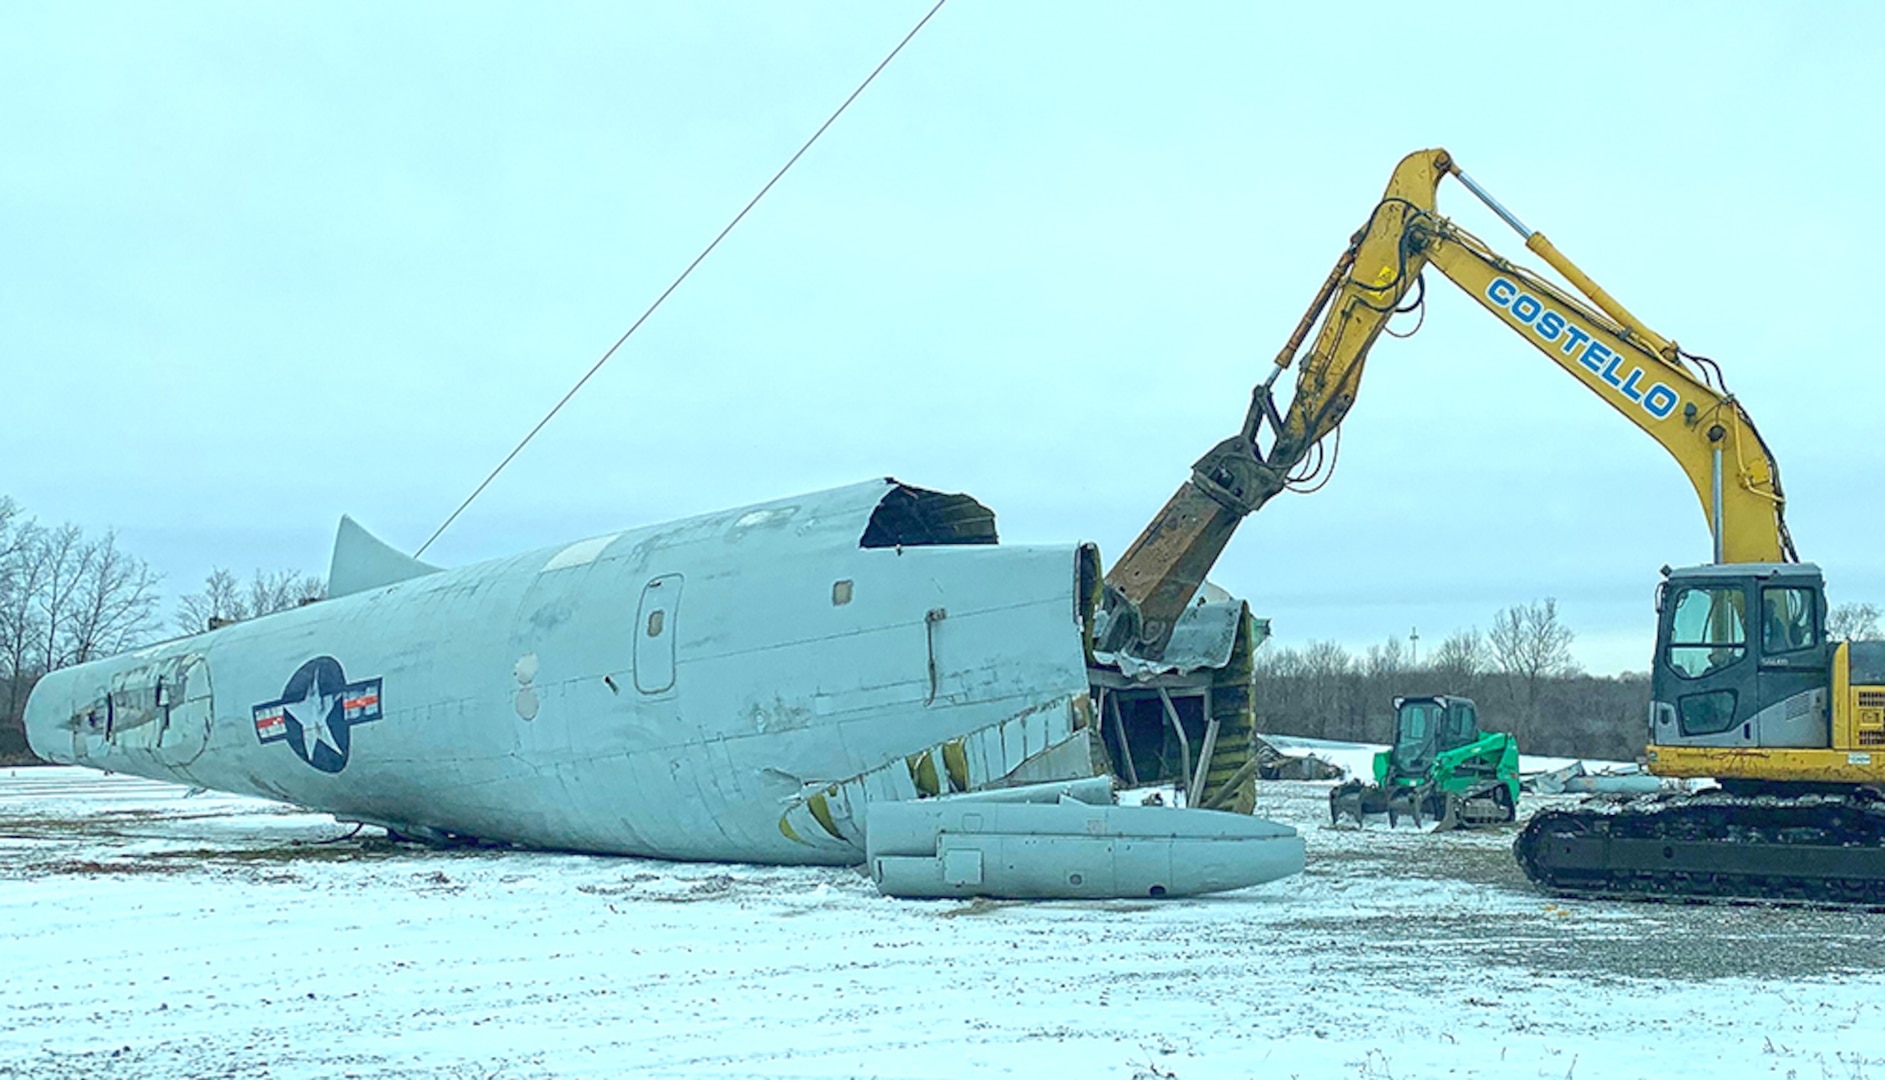 A large shearer tears apart a giant airframe in the snow.